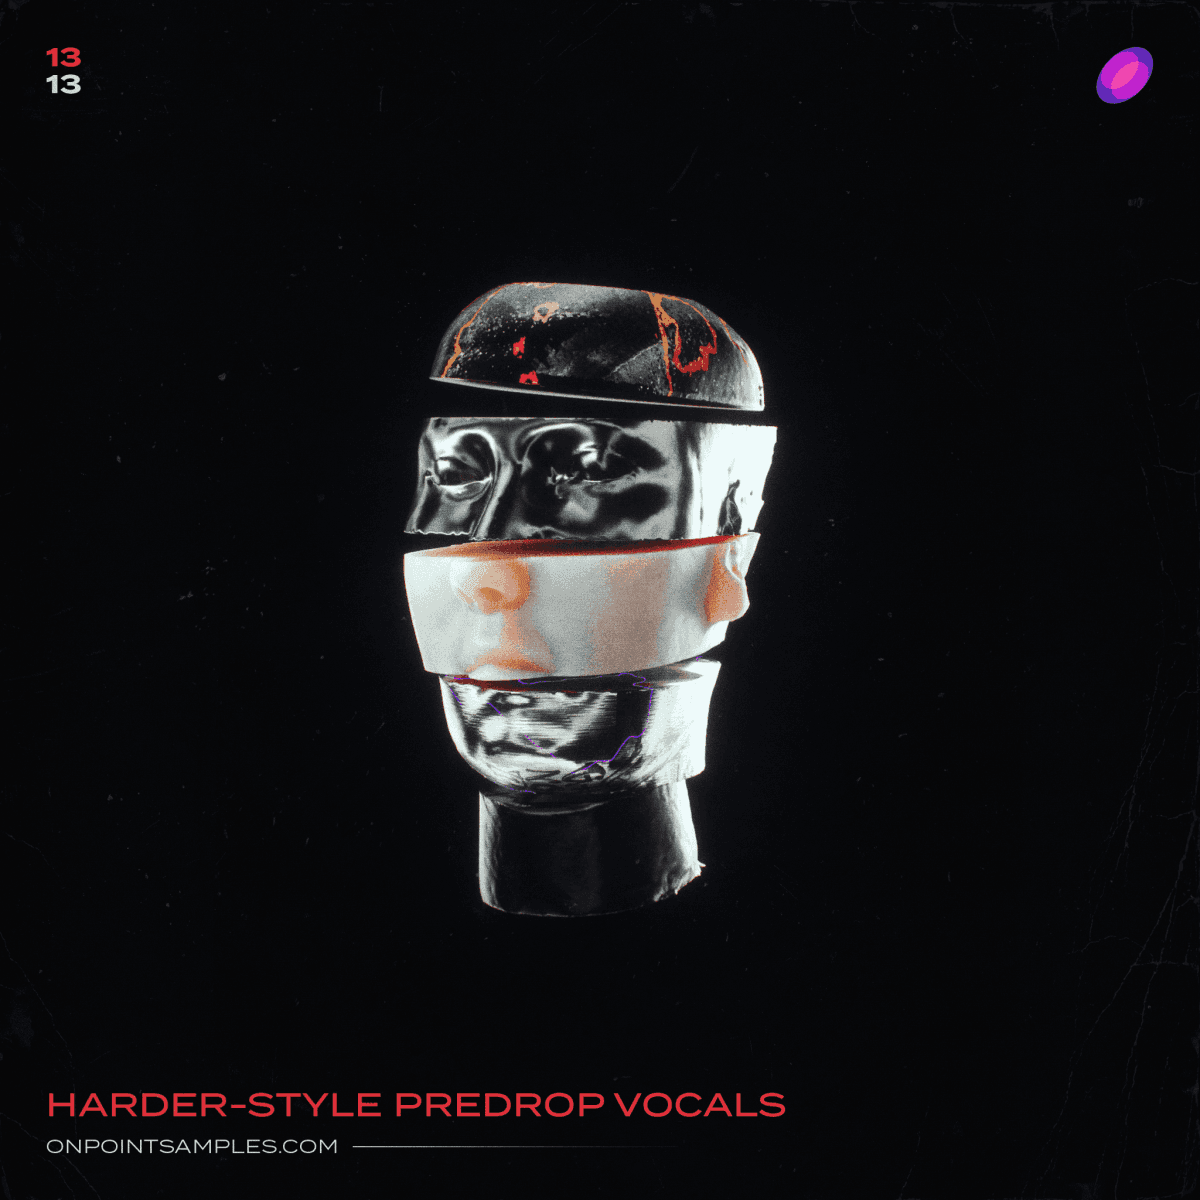 Harder-Style Predrop Vocals (Vol. 1) - On Point Samples